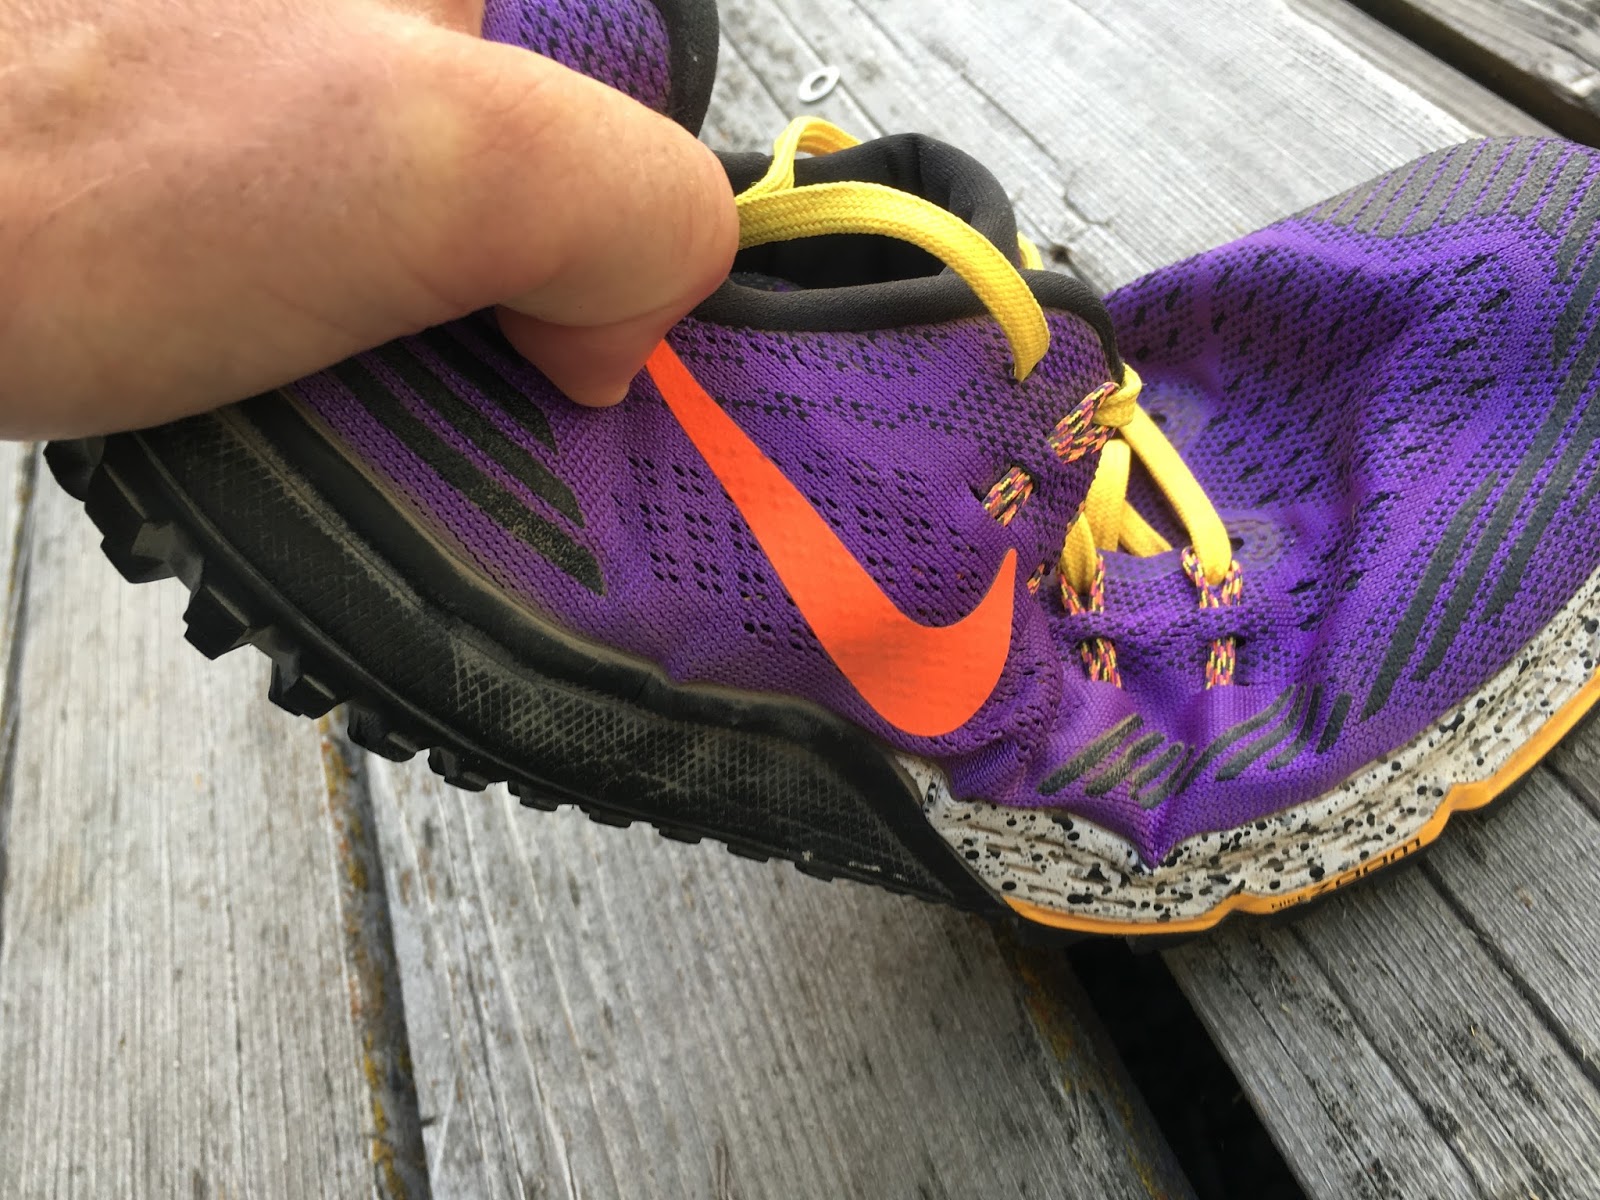 Road Trail Run: Nike Zoom Terra Kiger 3: Supportive, and Foot Conforming